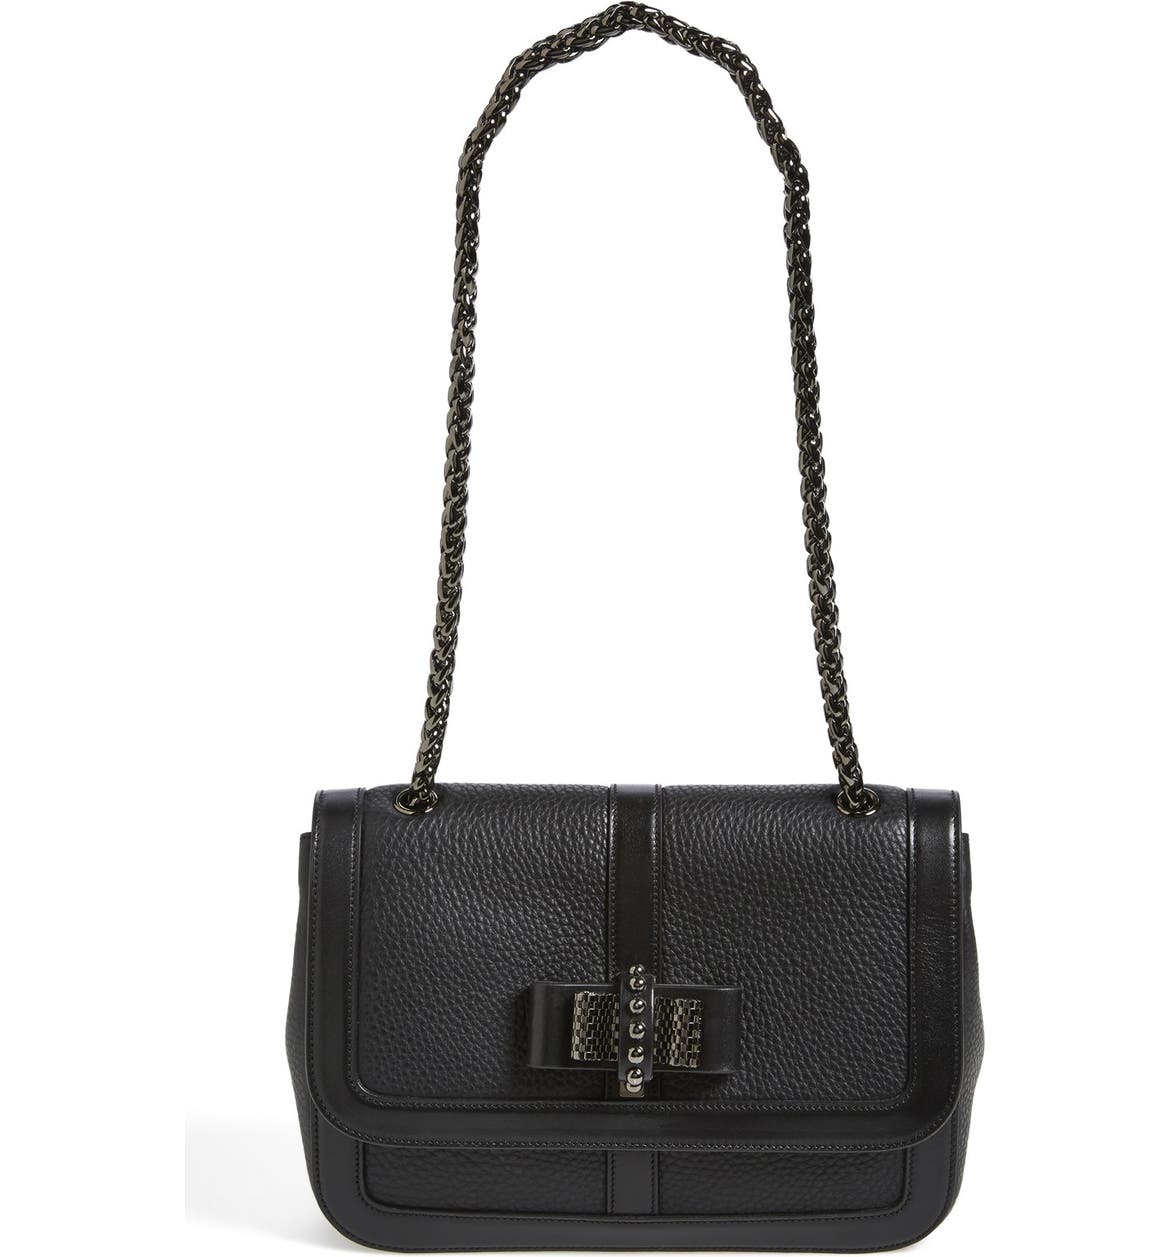 Christian Louboutin 'Small Sweet Charity' Studded Bow Flap Shoulder Bag ...